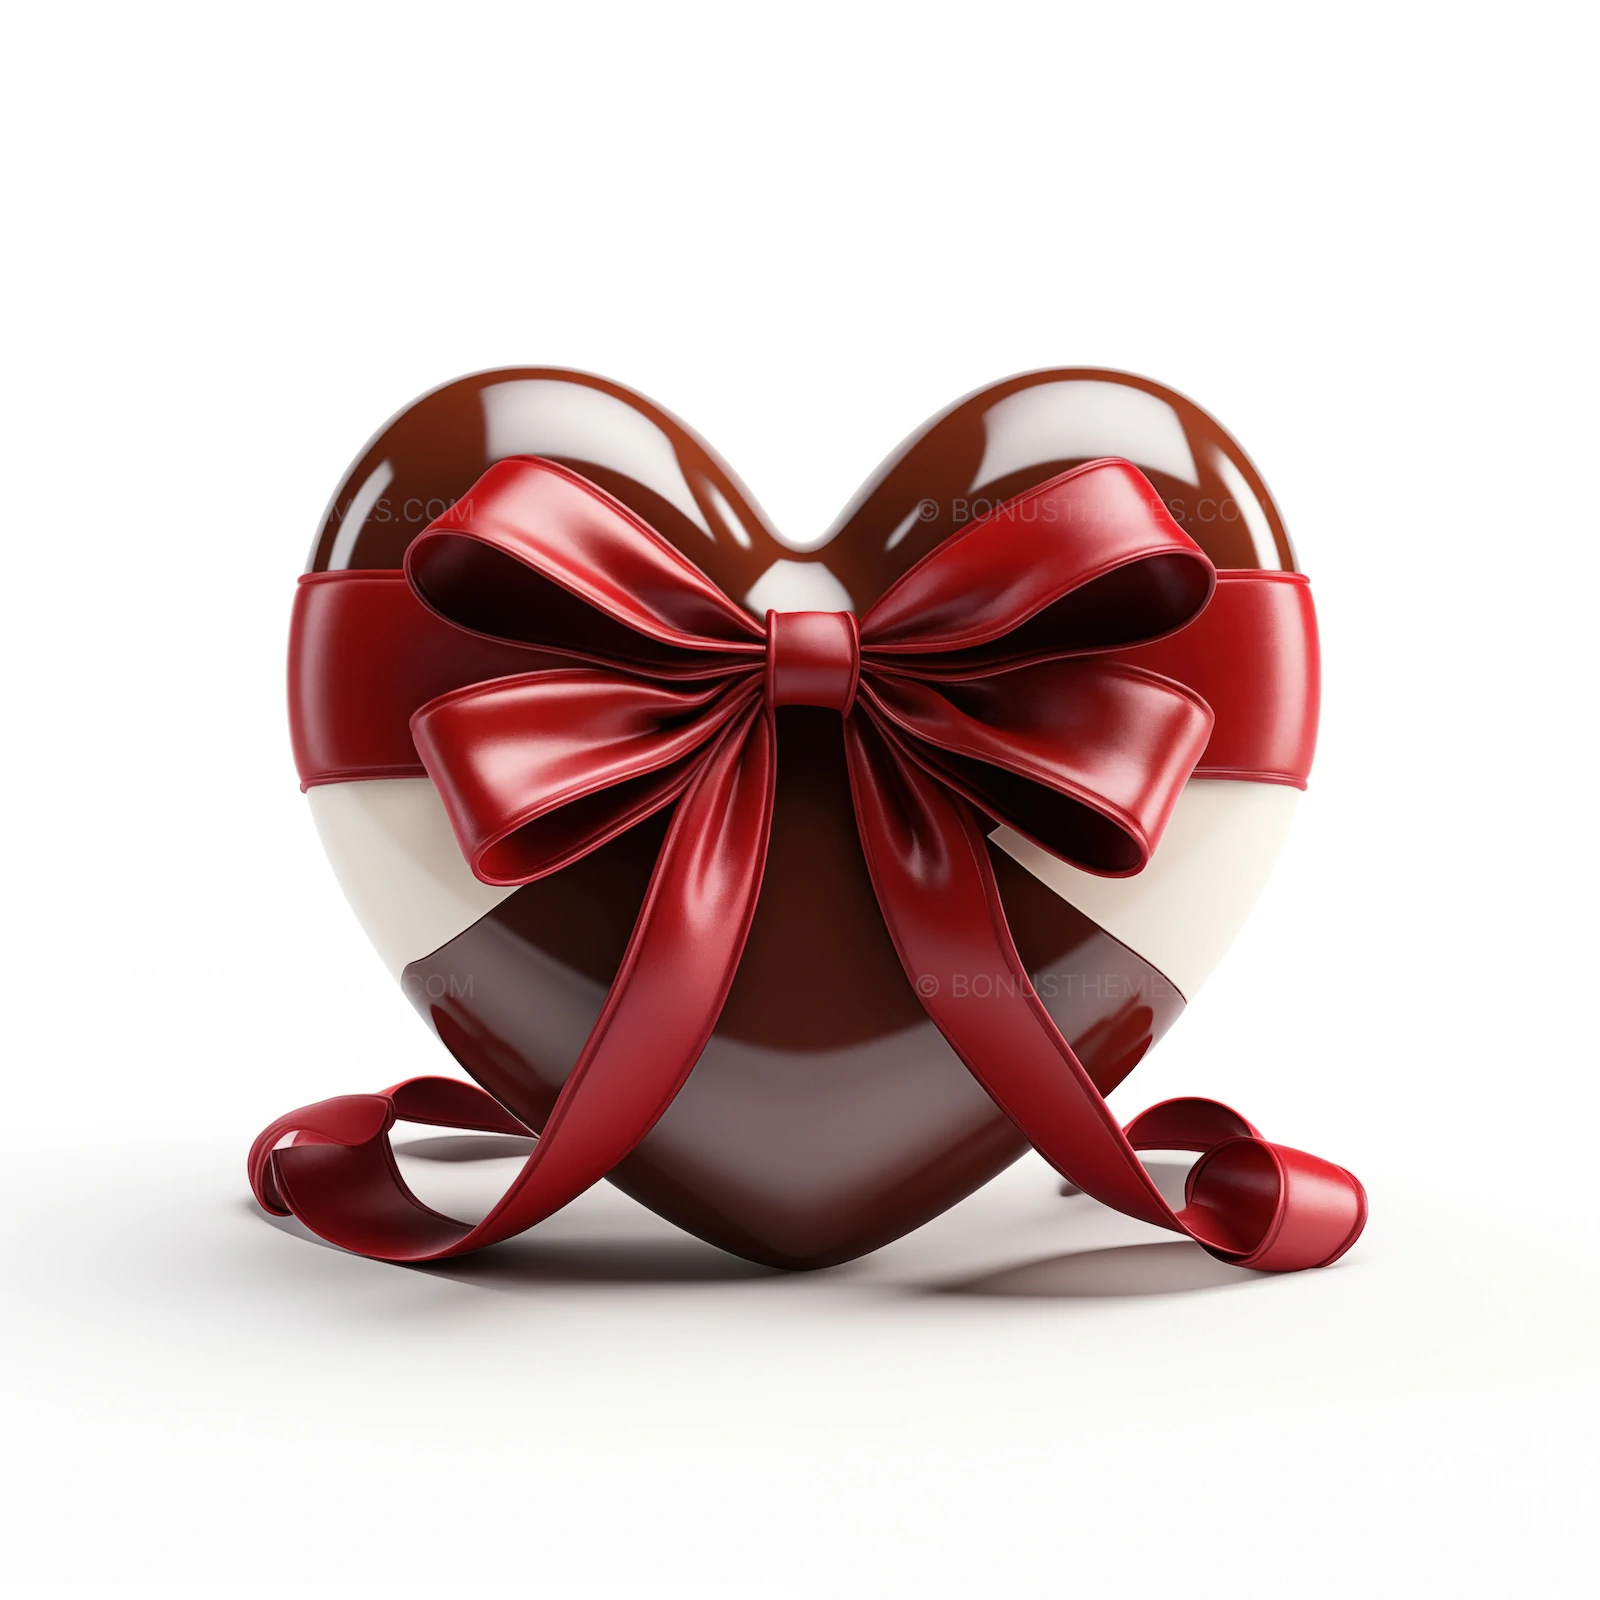 Red bow with chocolate heart shape